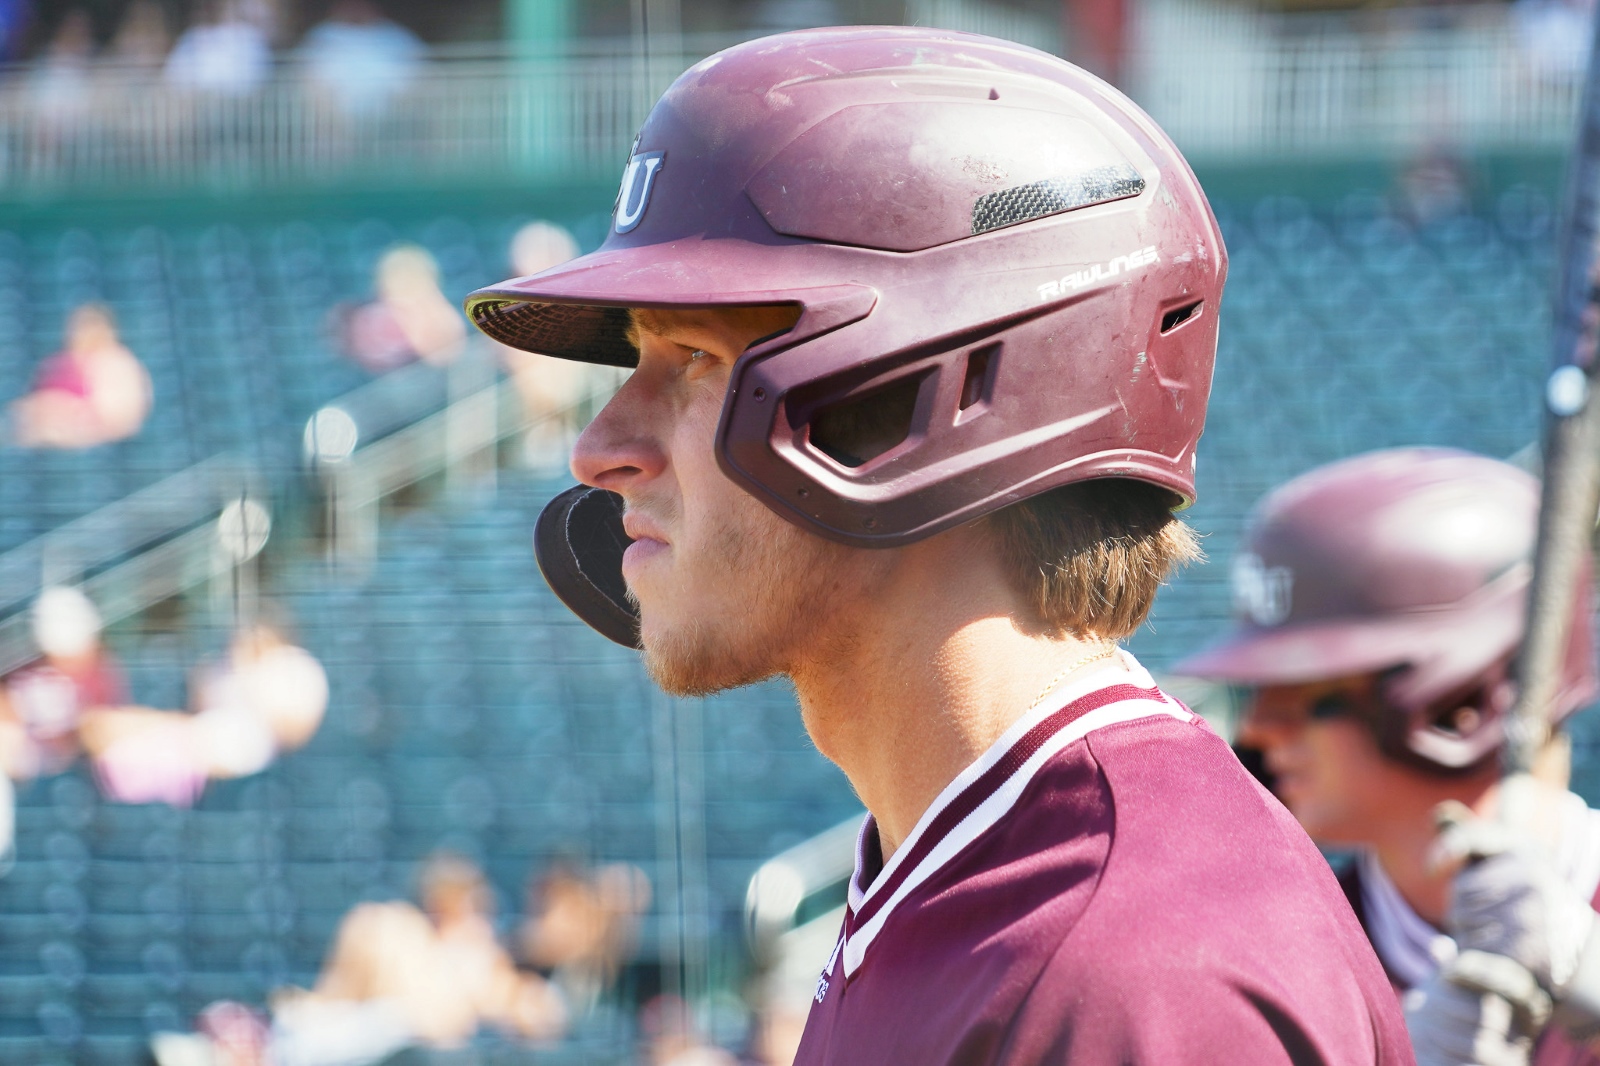 Spencer Nivens, wearing a Missouri State baseball uniform, waits in the on-deck circle during a game at Hammons Field in Springfield, Missouri.